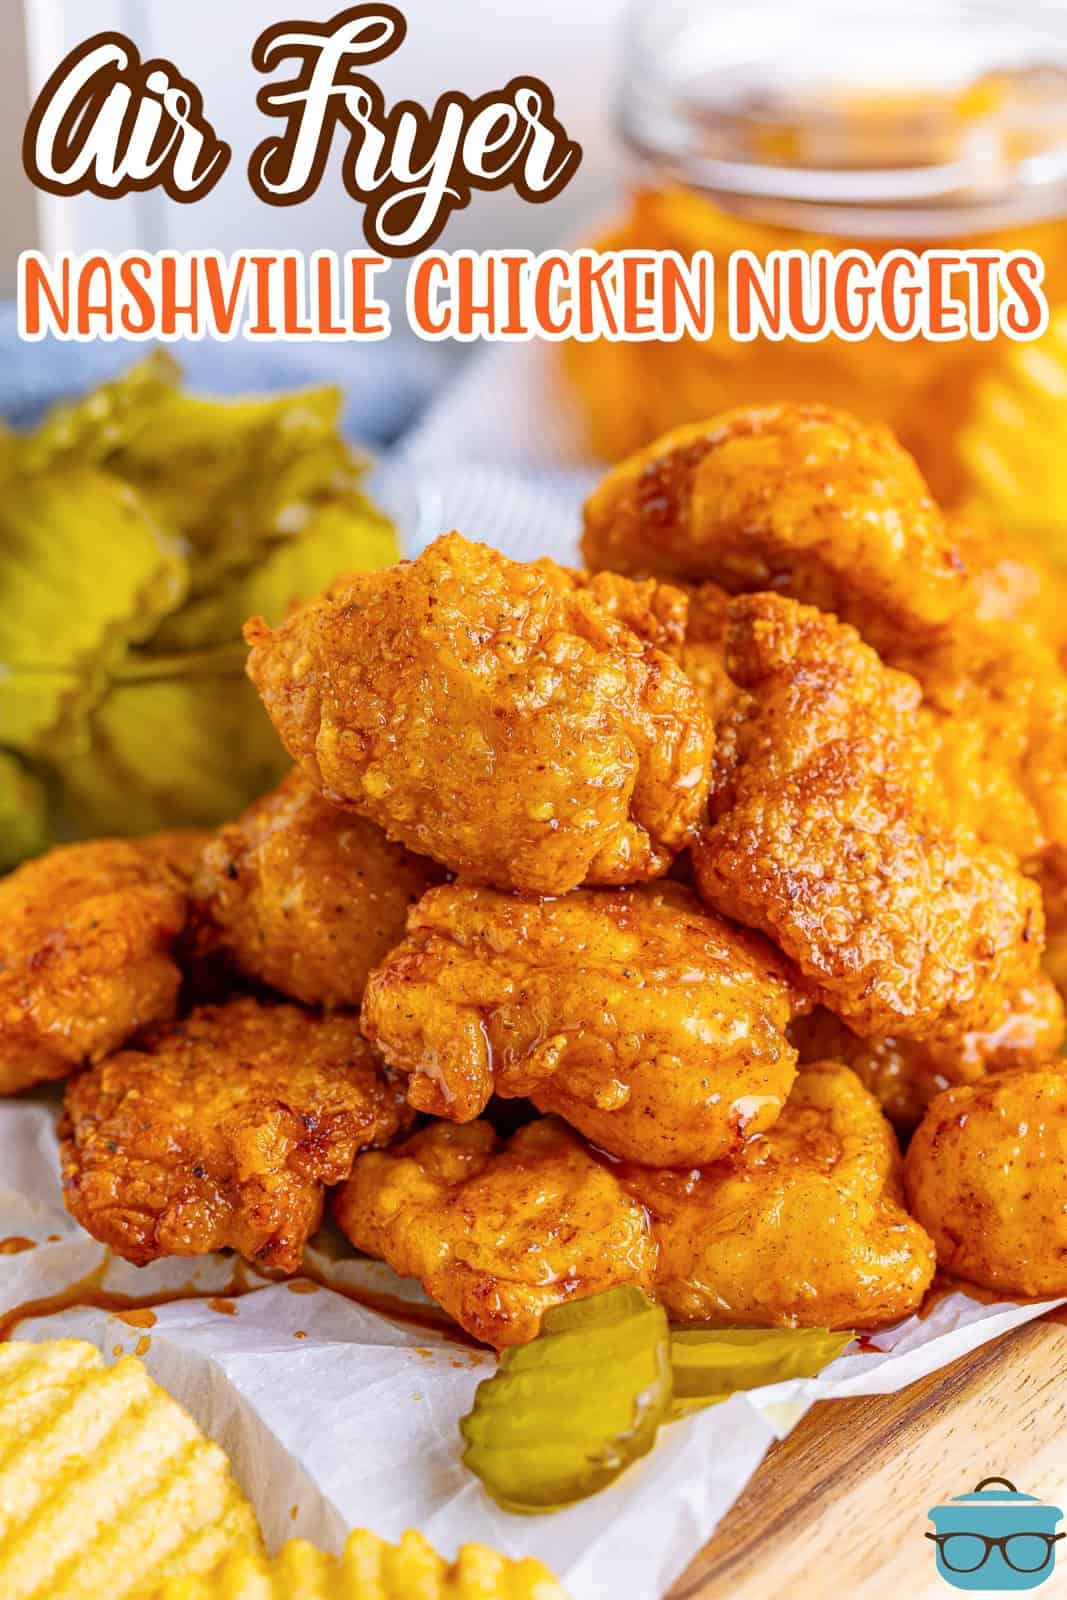 a stack of Nashville Chicken Nuggets with slices of dill pickles and ridge potato chips with a glass of iced tea in the background.